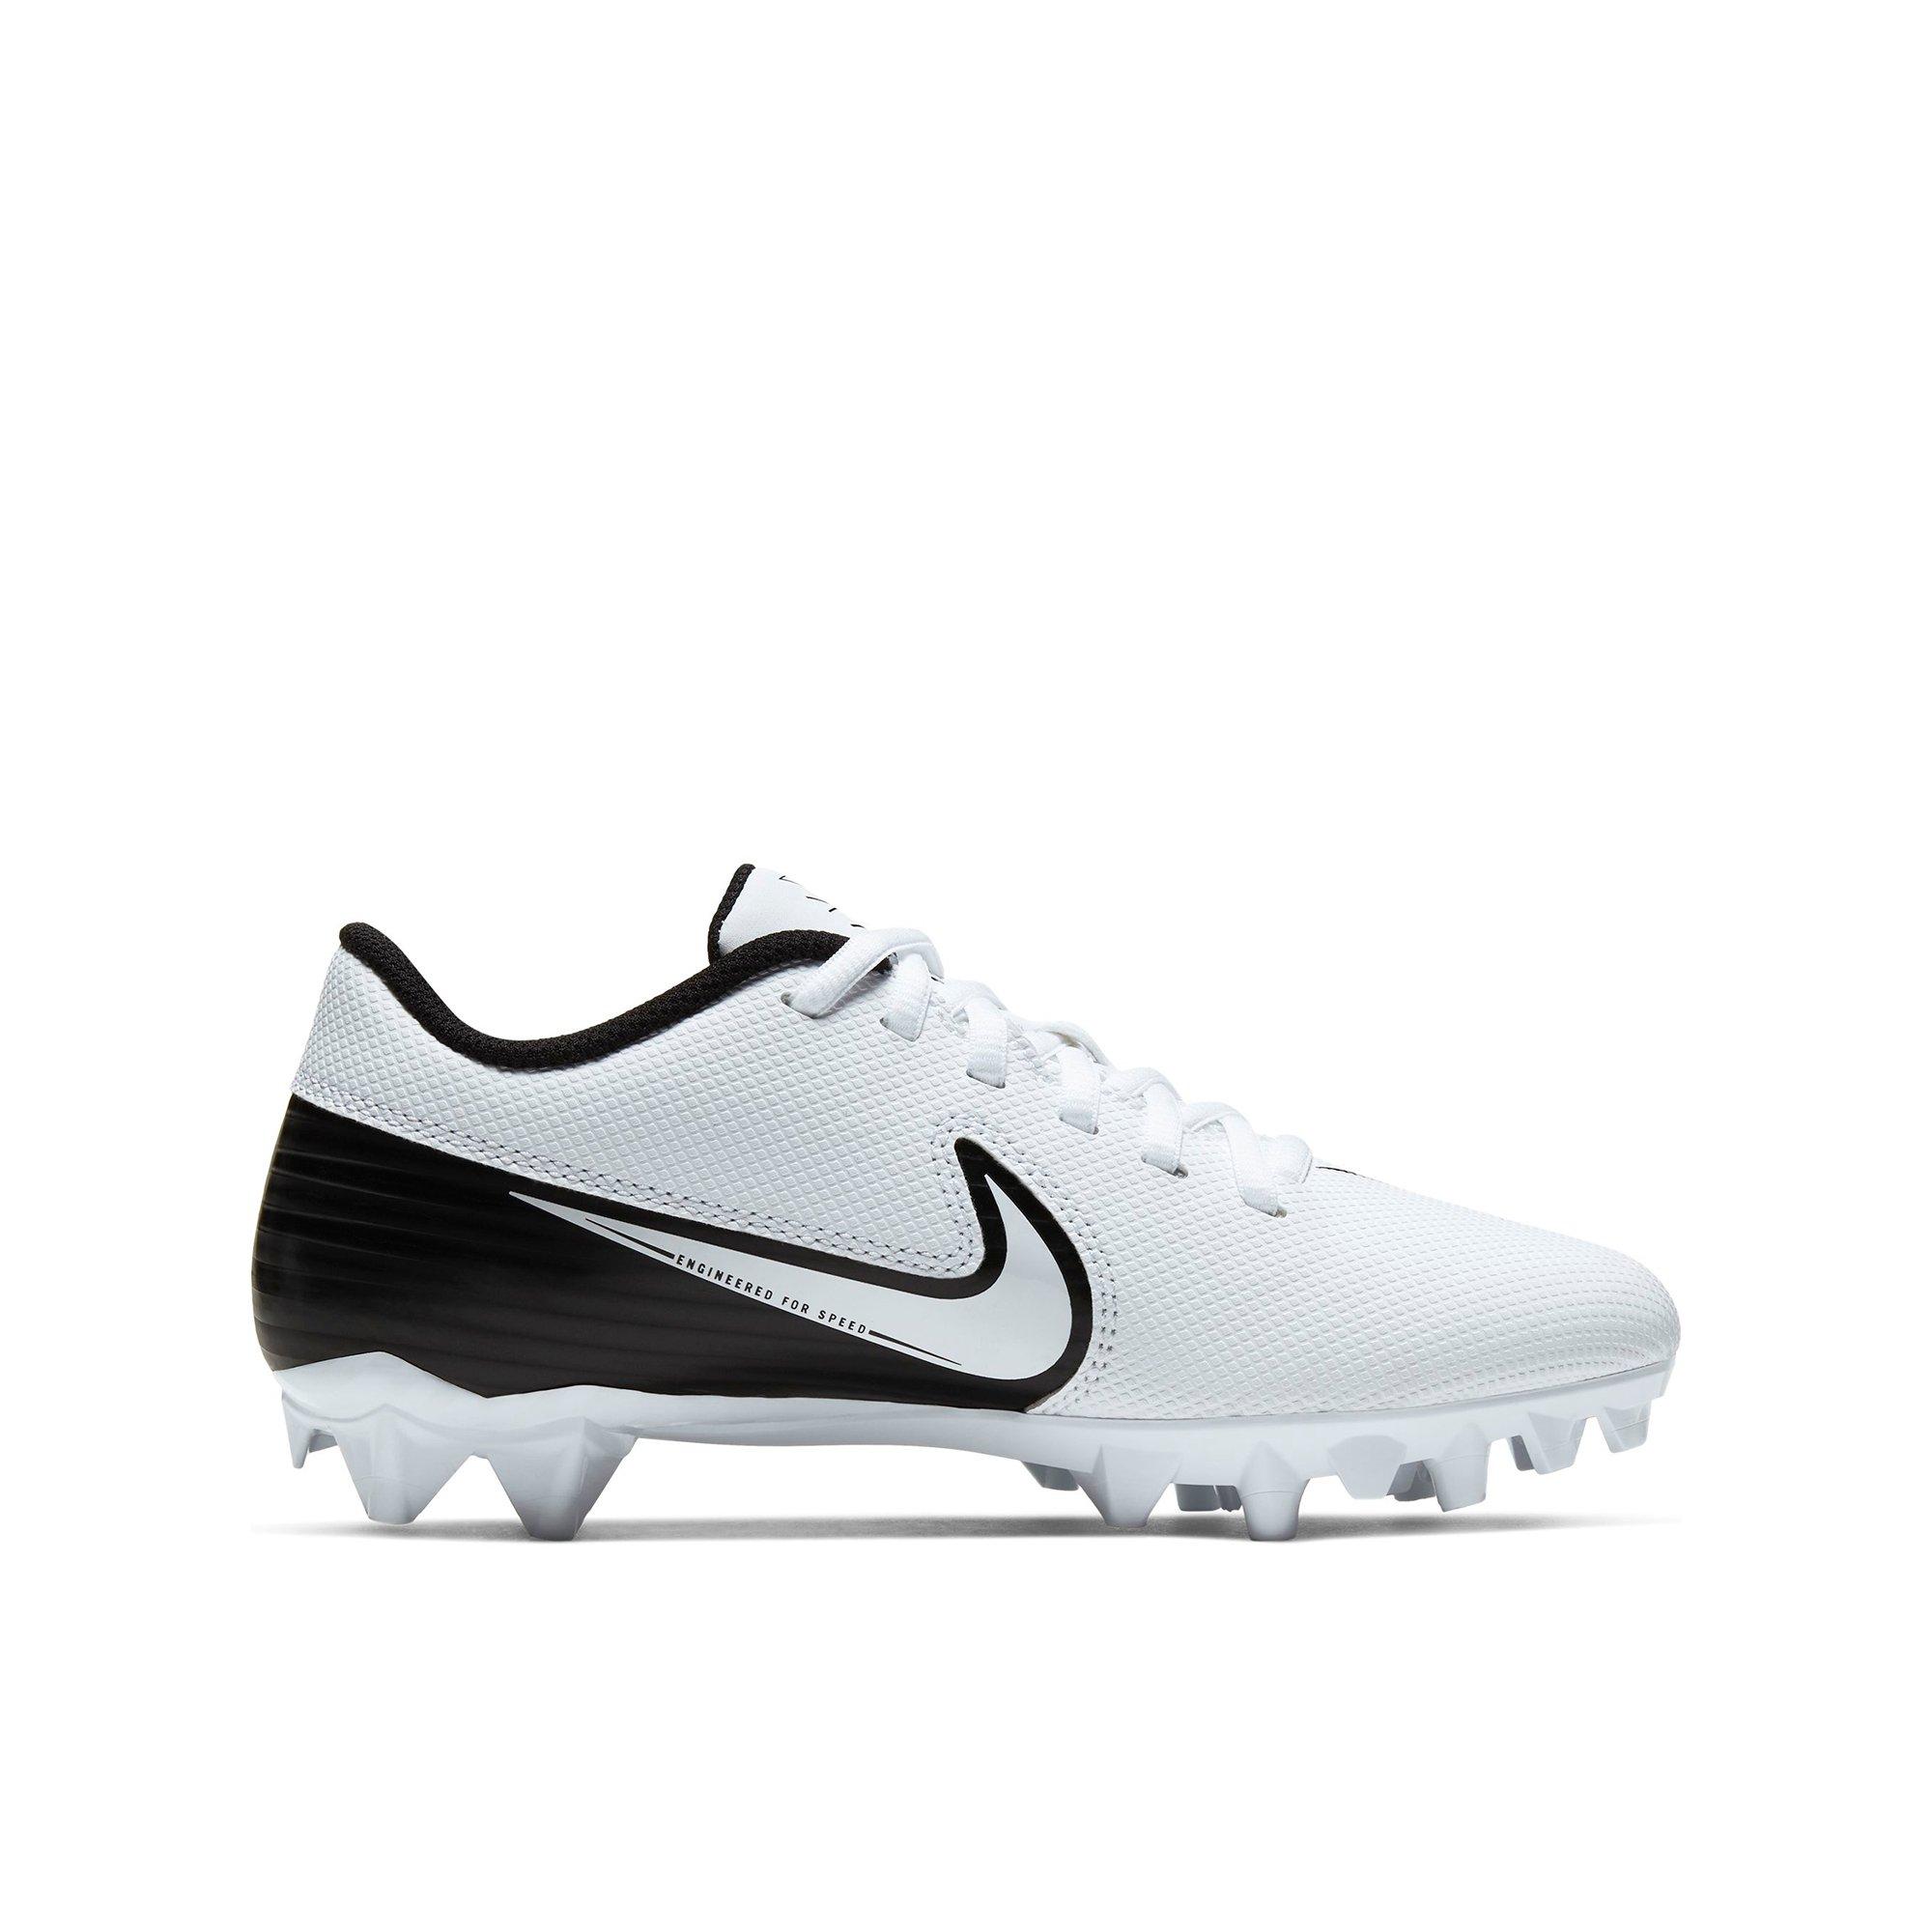 football cleats size 10c